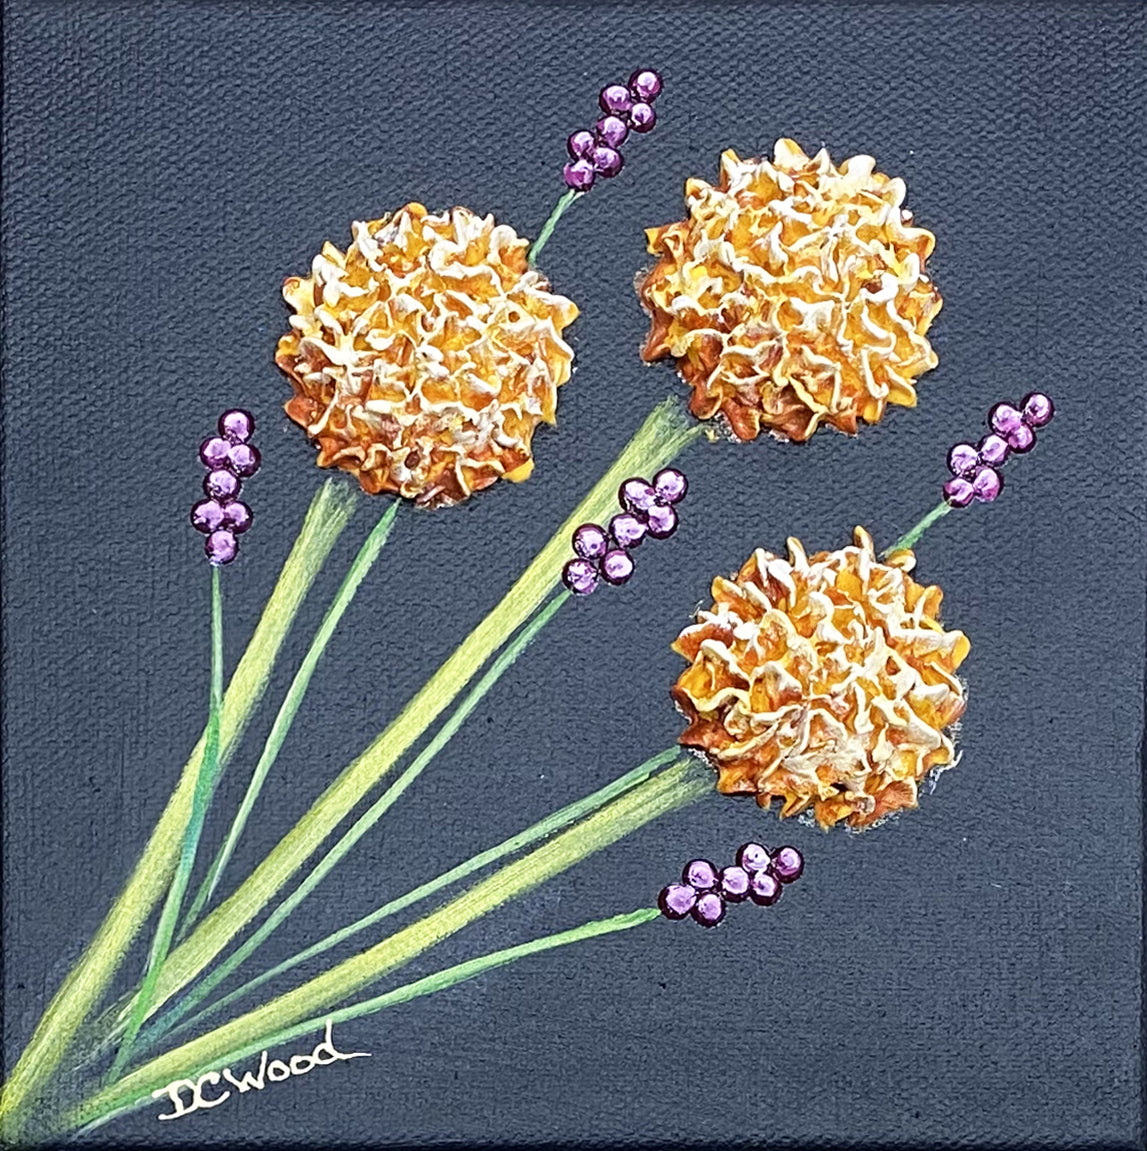 Small Works contemporary floral paintings by Denise Cassidy Wood of Northville, Mich. 